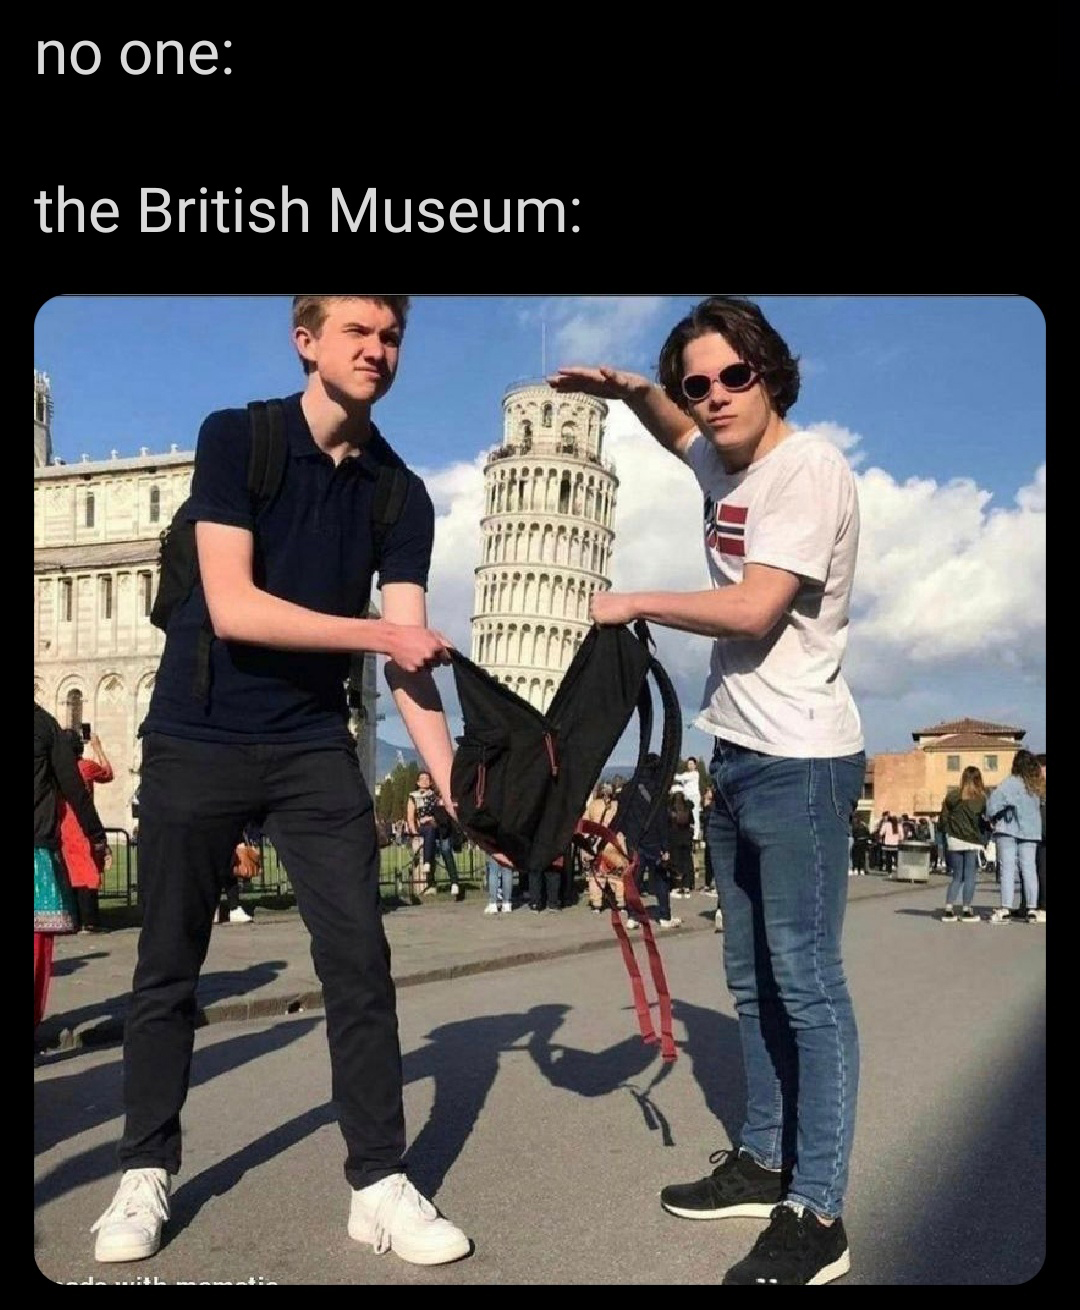 hilarious memes - piazza dei miracoli - no one the British Museum